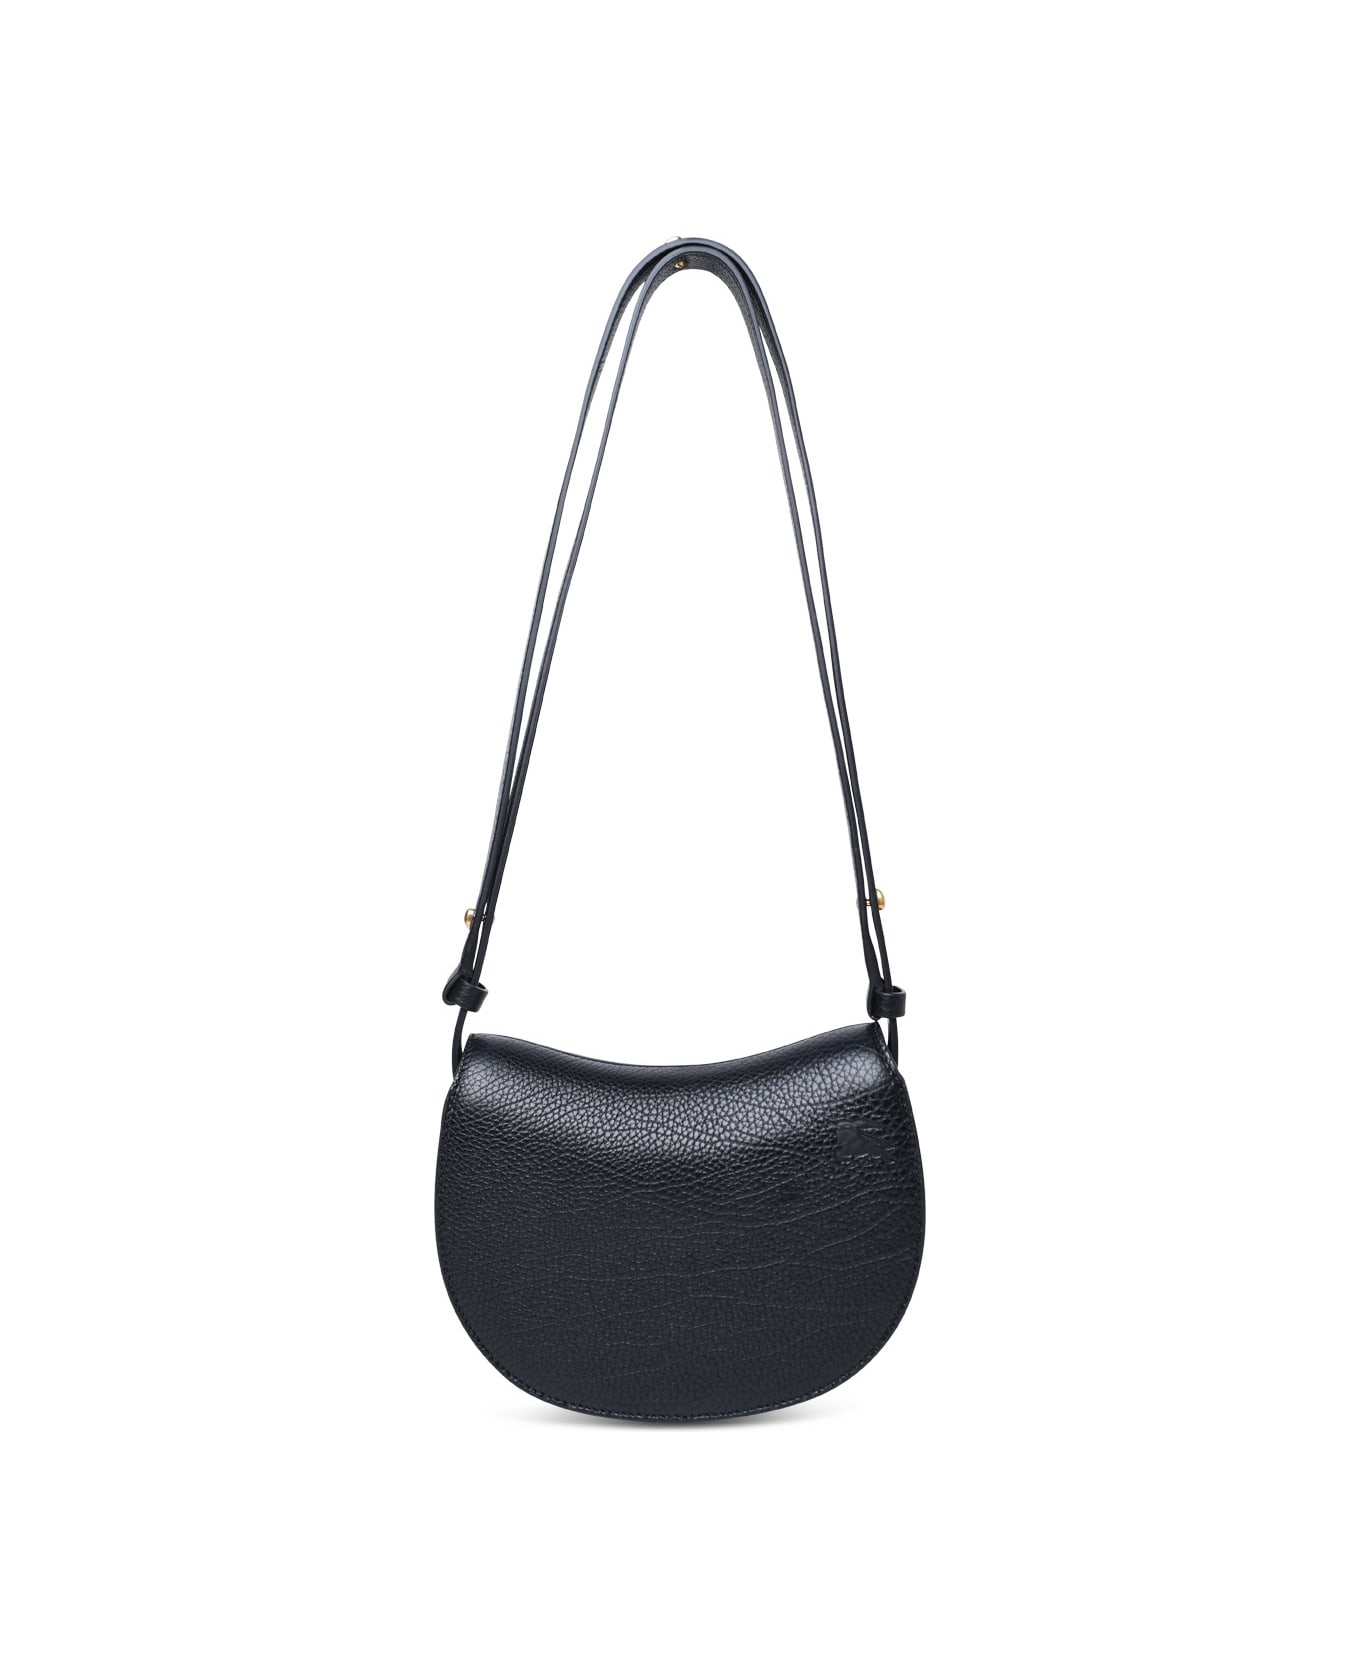 Burberry 'rocking Horse' Mini Bag In Black Leather - Black トートバッグ